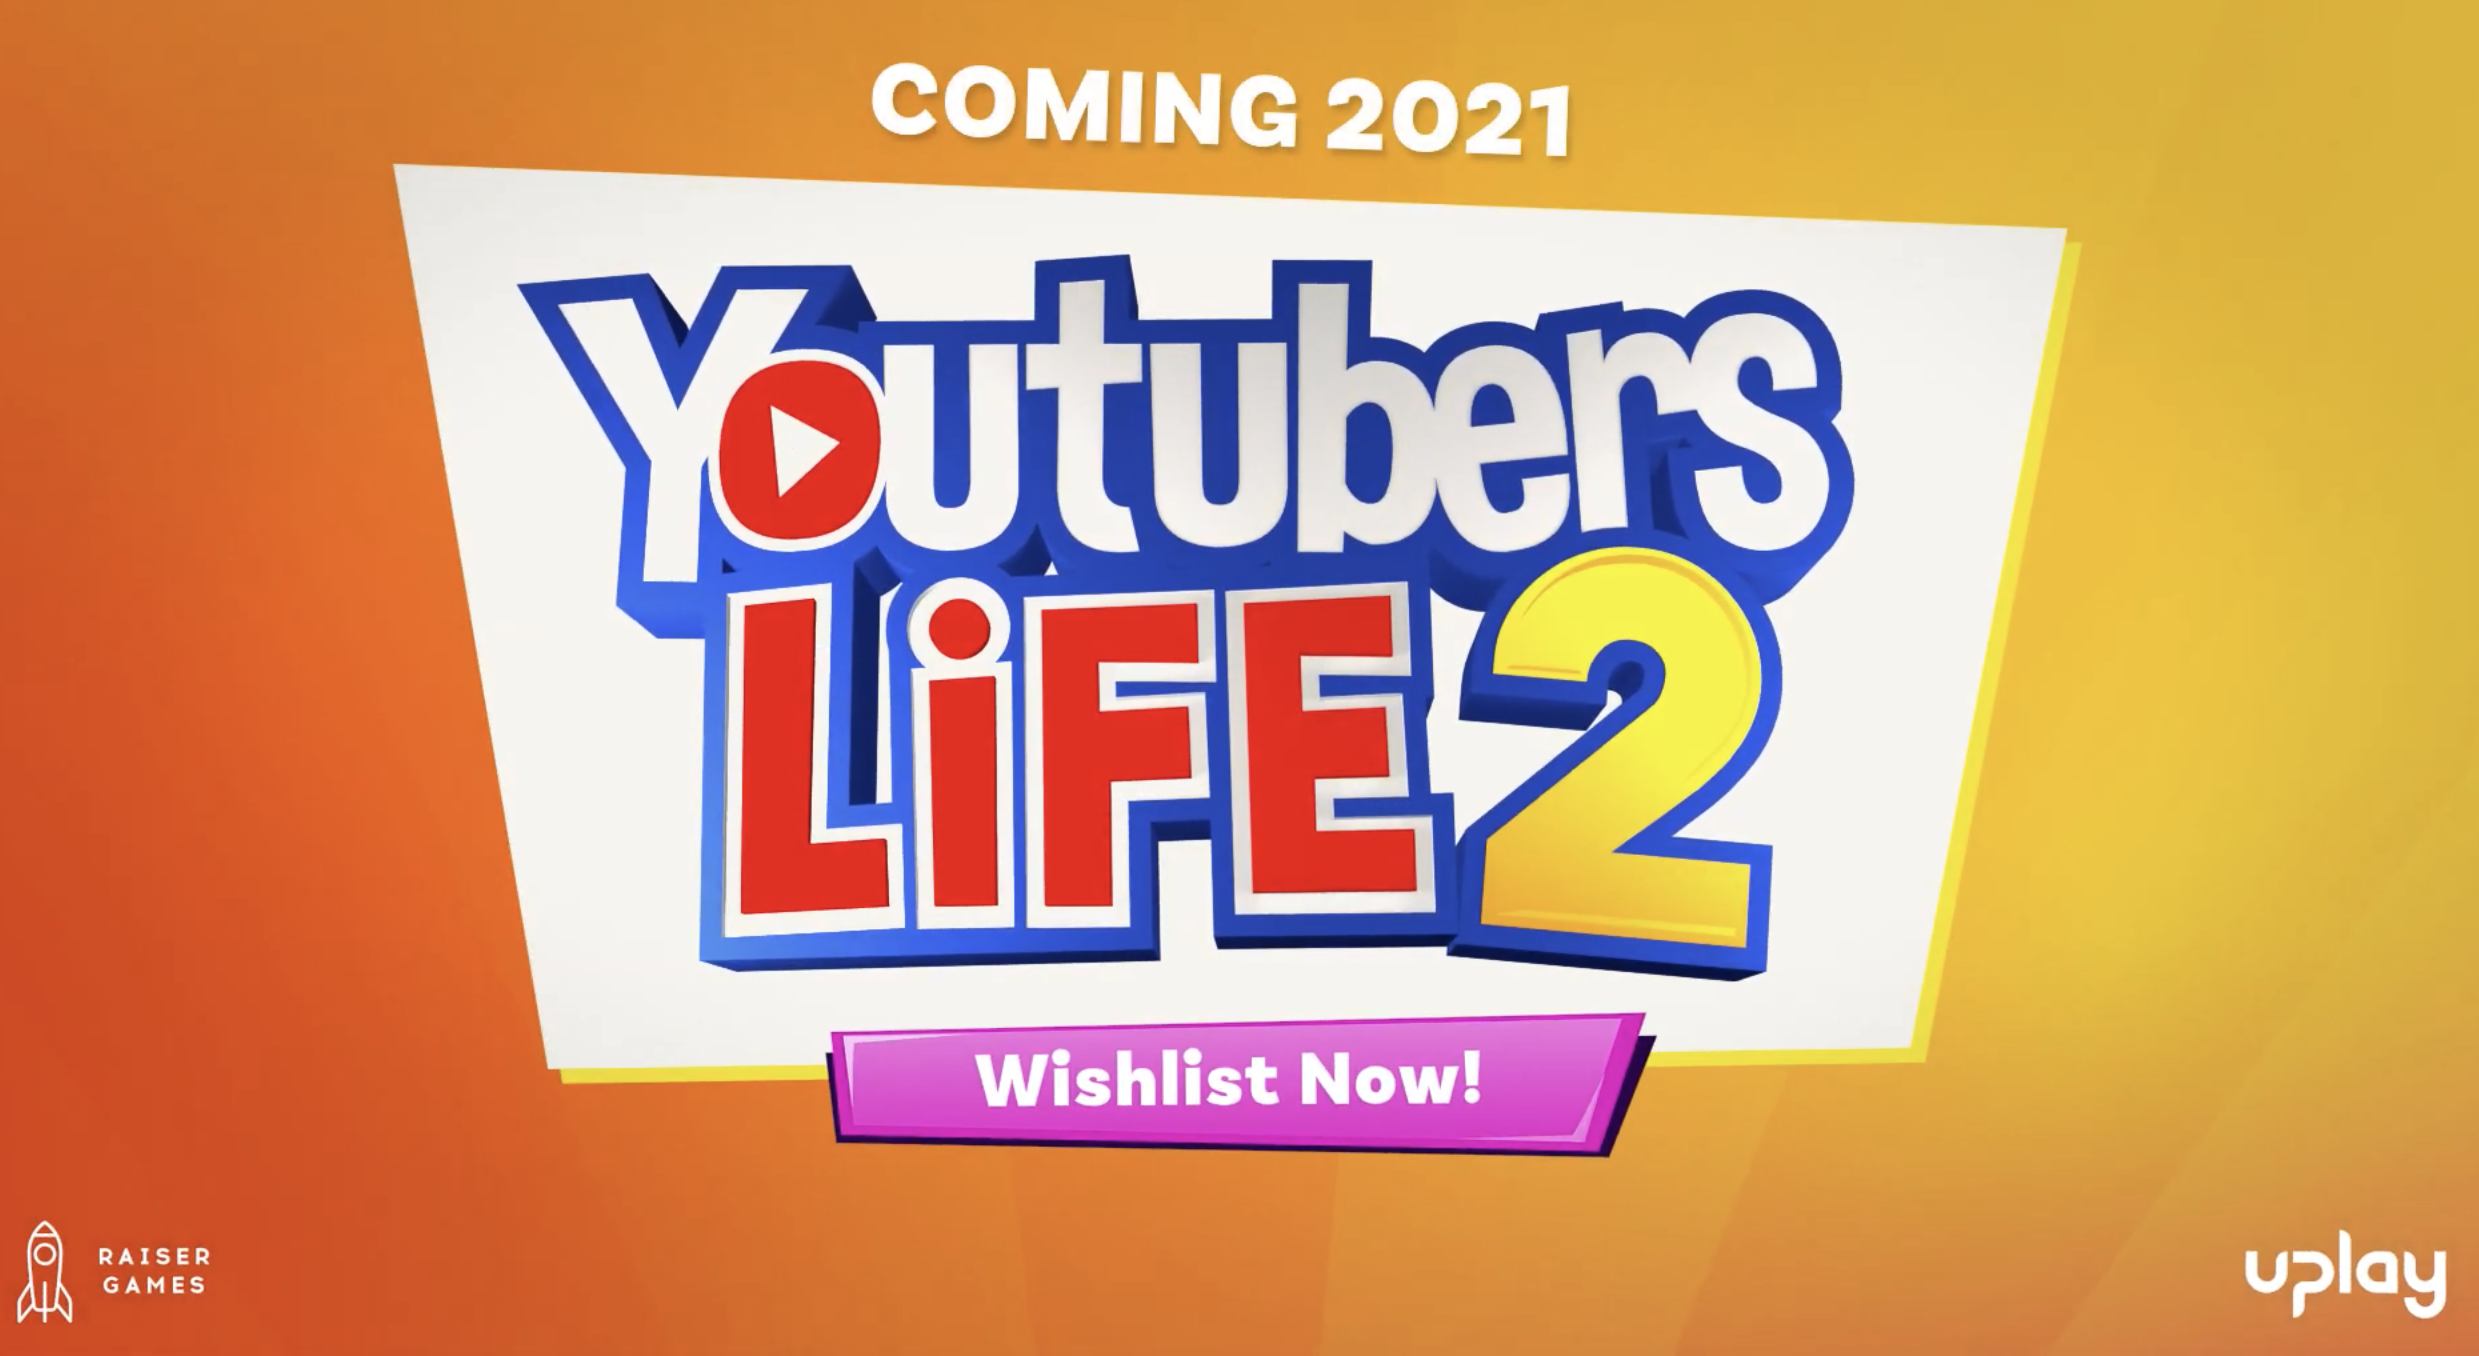 youtubers life 2 review